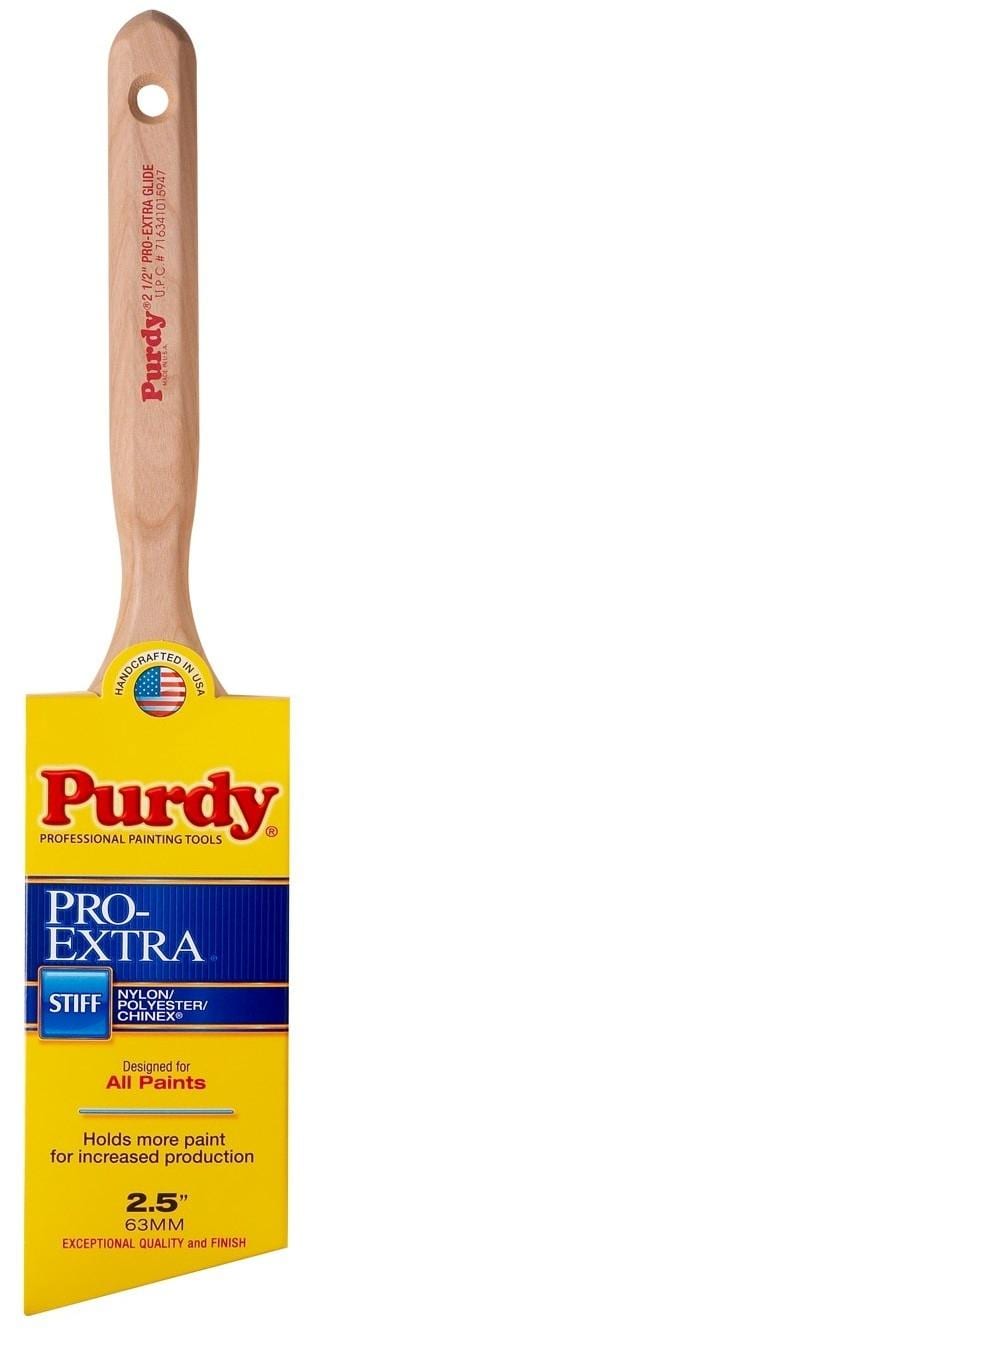 Purdy Pro-Extra Glide 2 In. Angle Sash Paint Brush 144152720, 1 - Fred Meyer